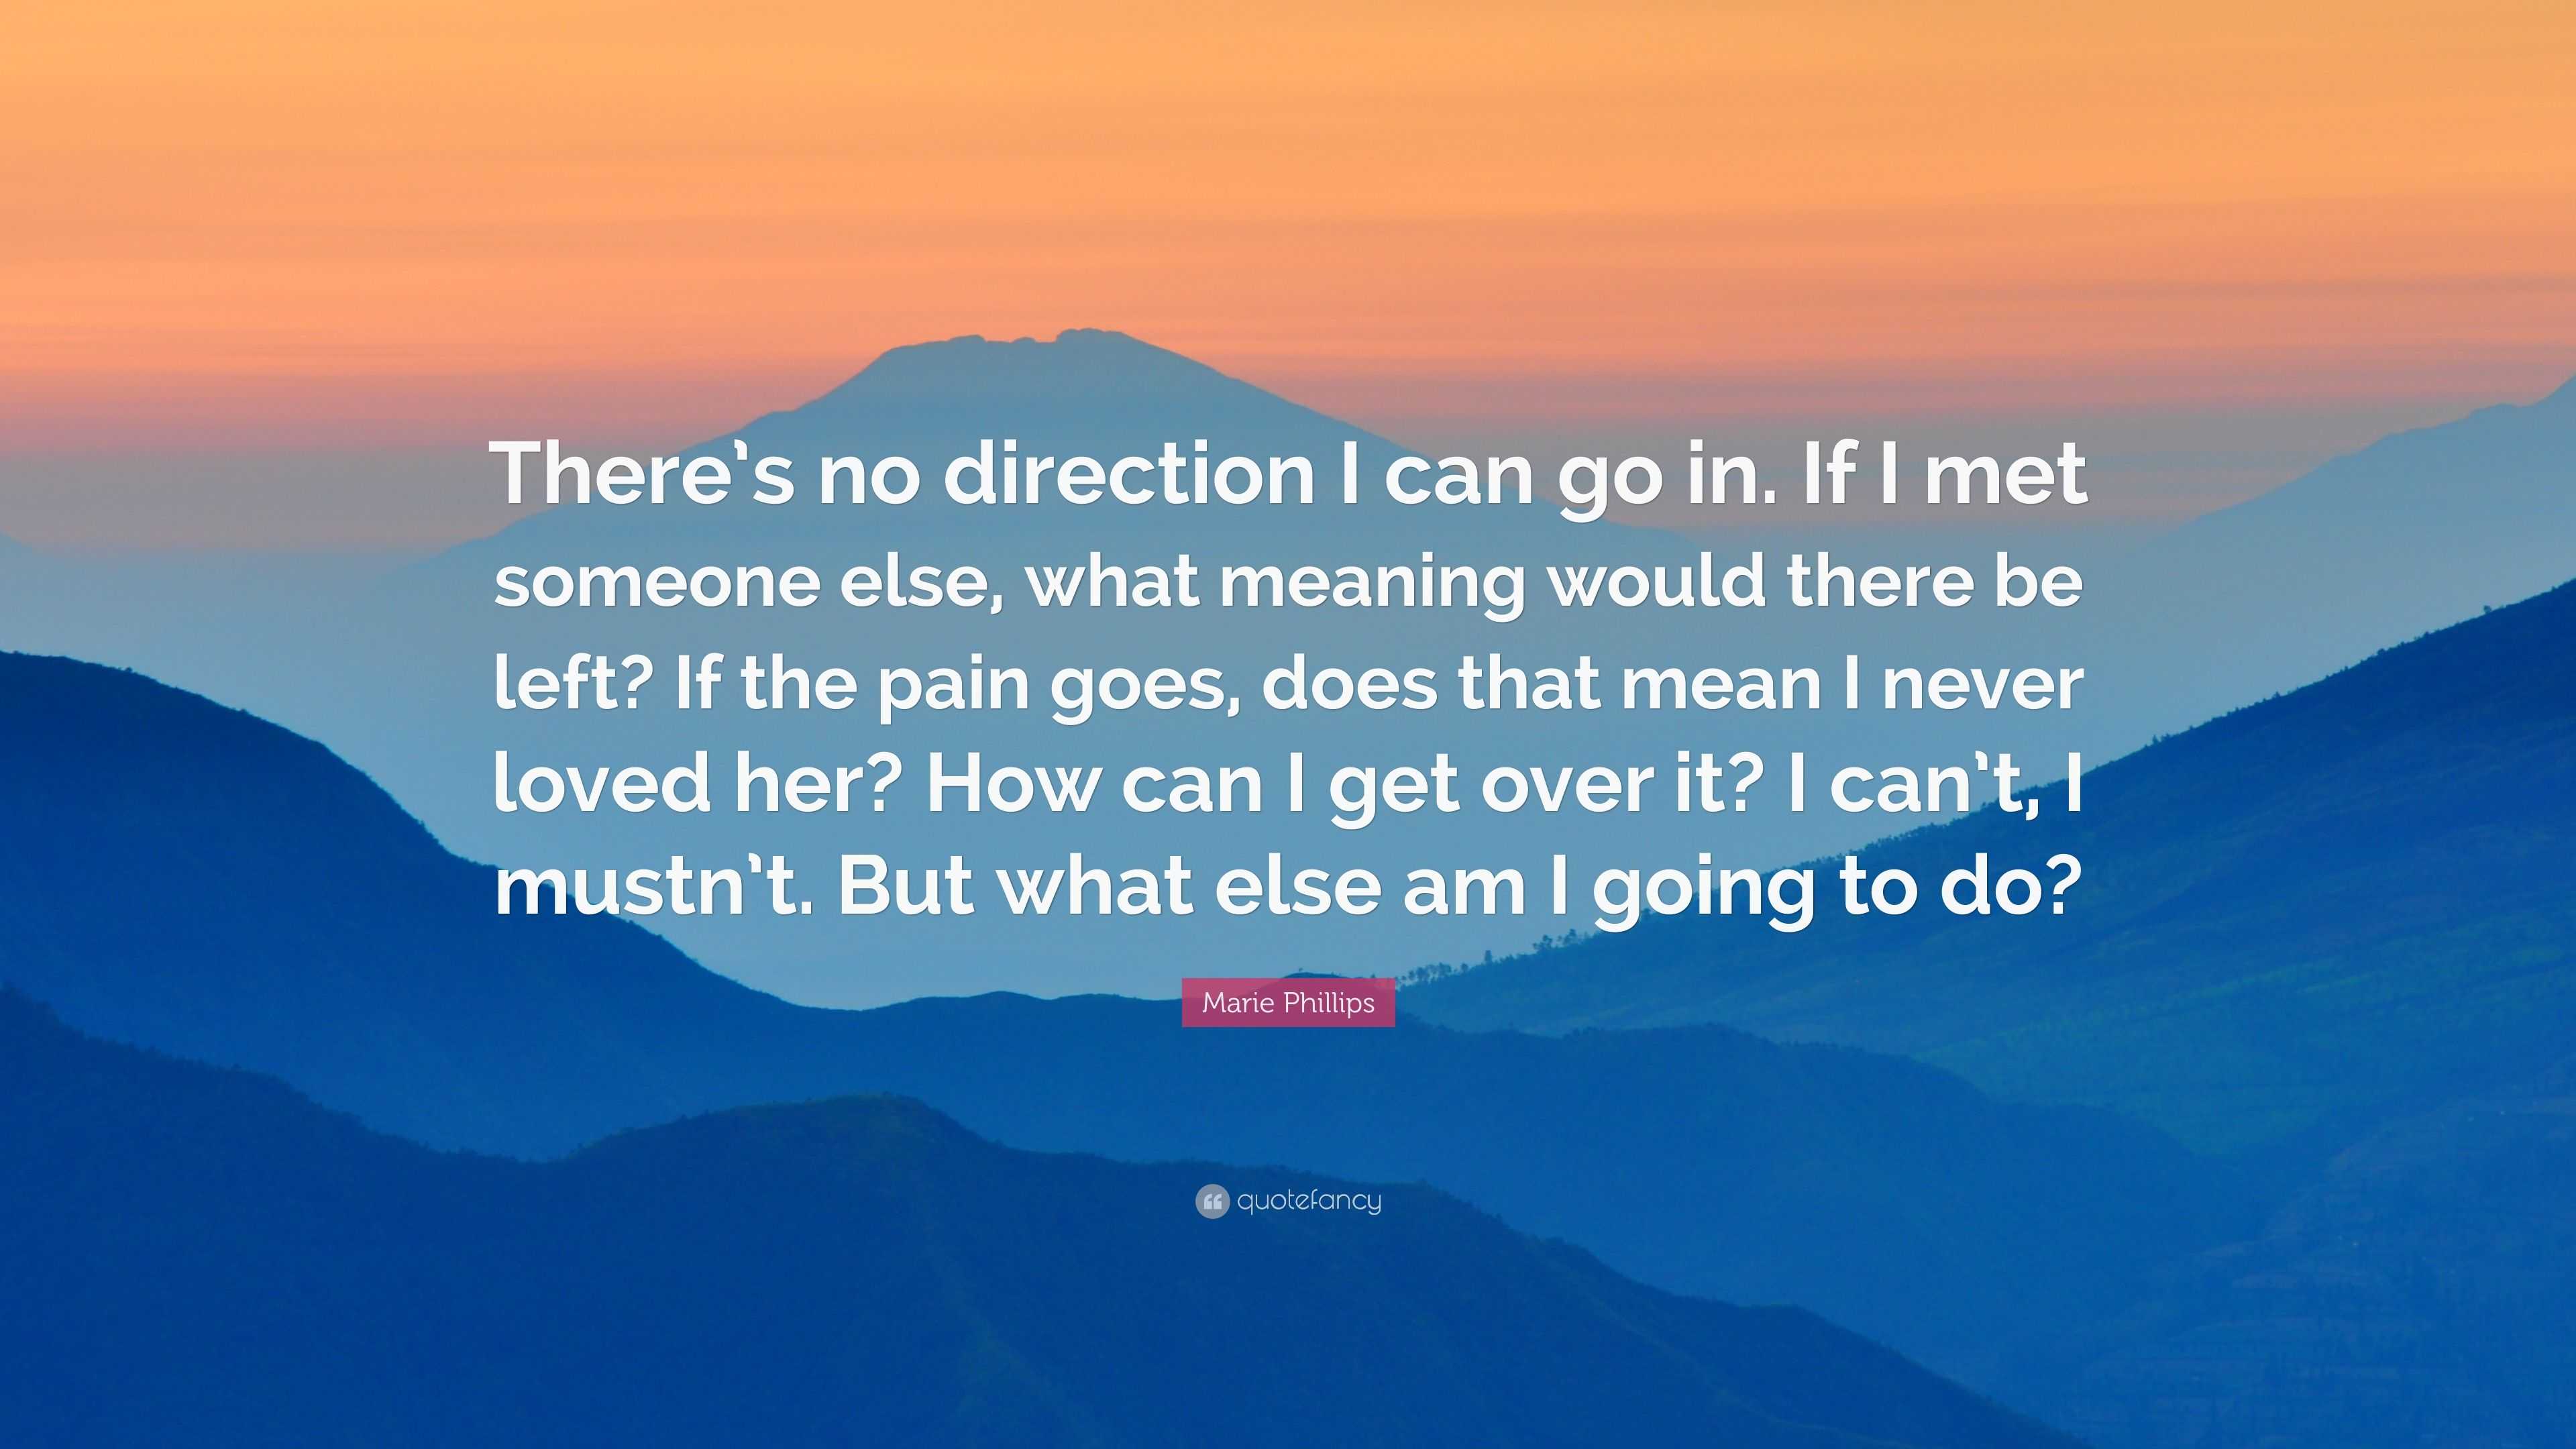 Marie Phillips Quote: “There's no direction I can go in. If I met someone  else, what meaning would there be left? If the pain goes, does that m”